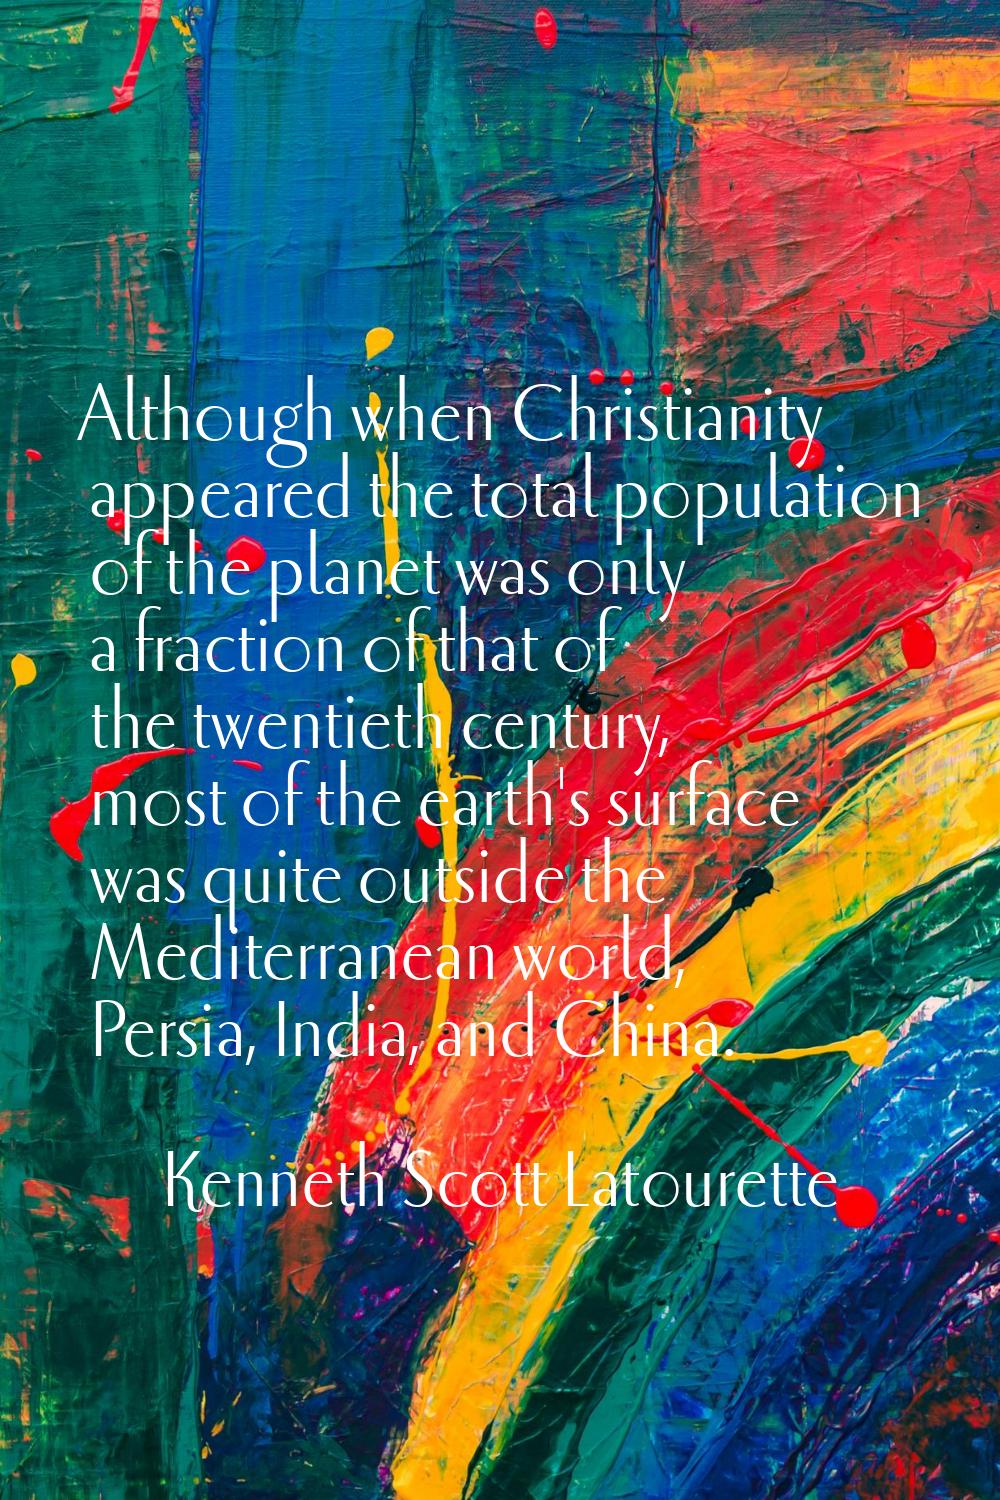 Although when Christianity appeared the total population of the planet was only a fraction of that 